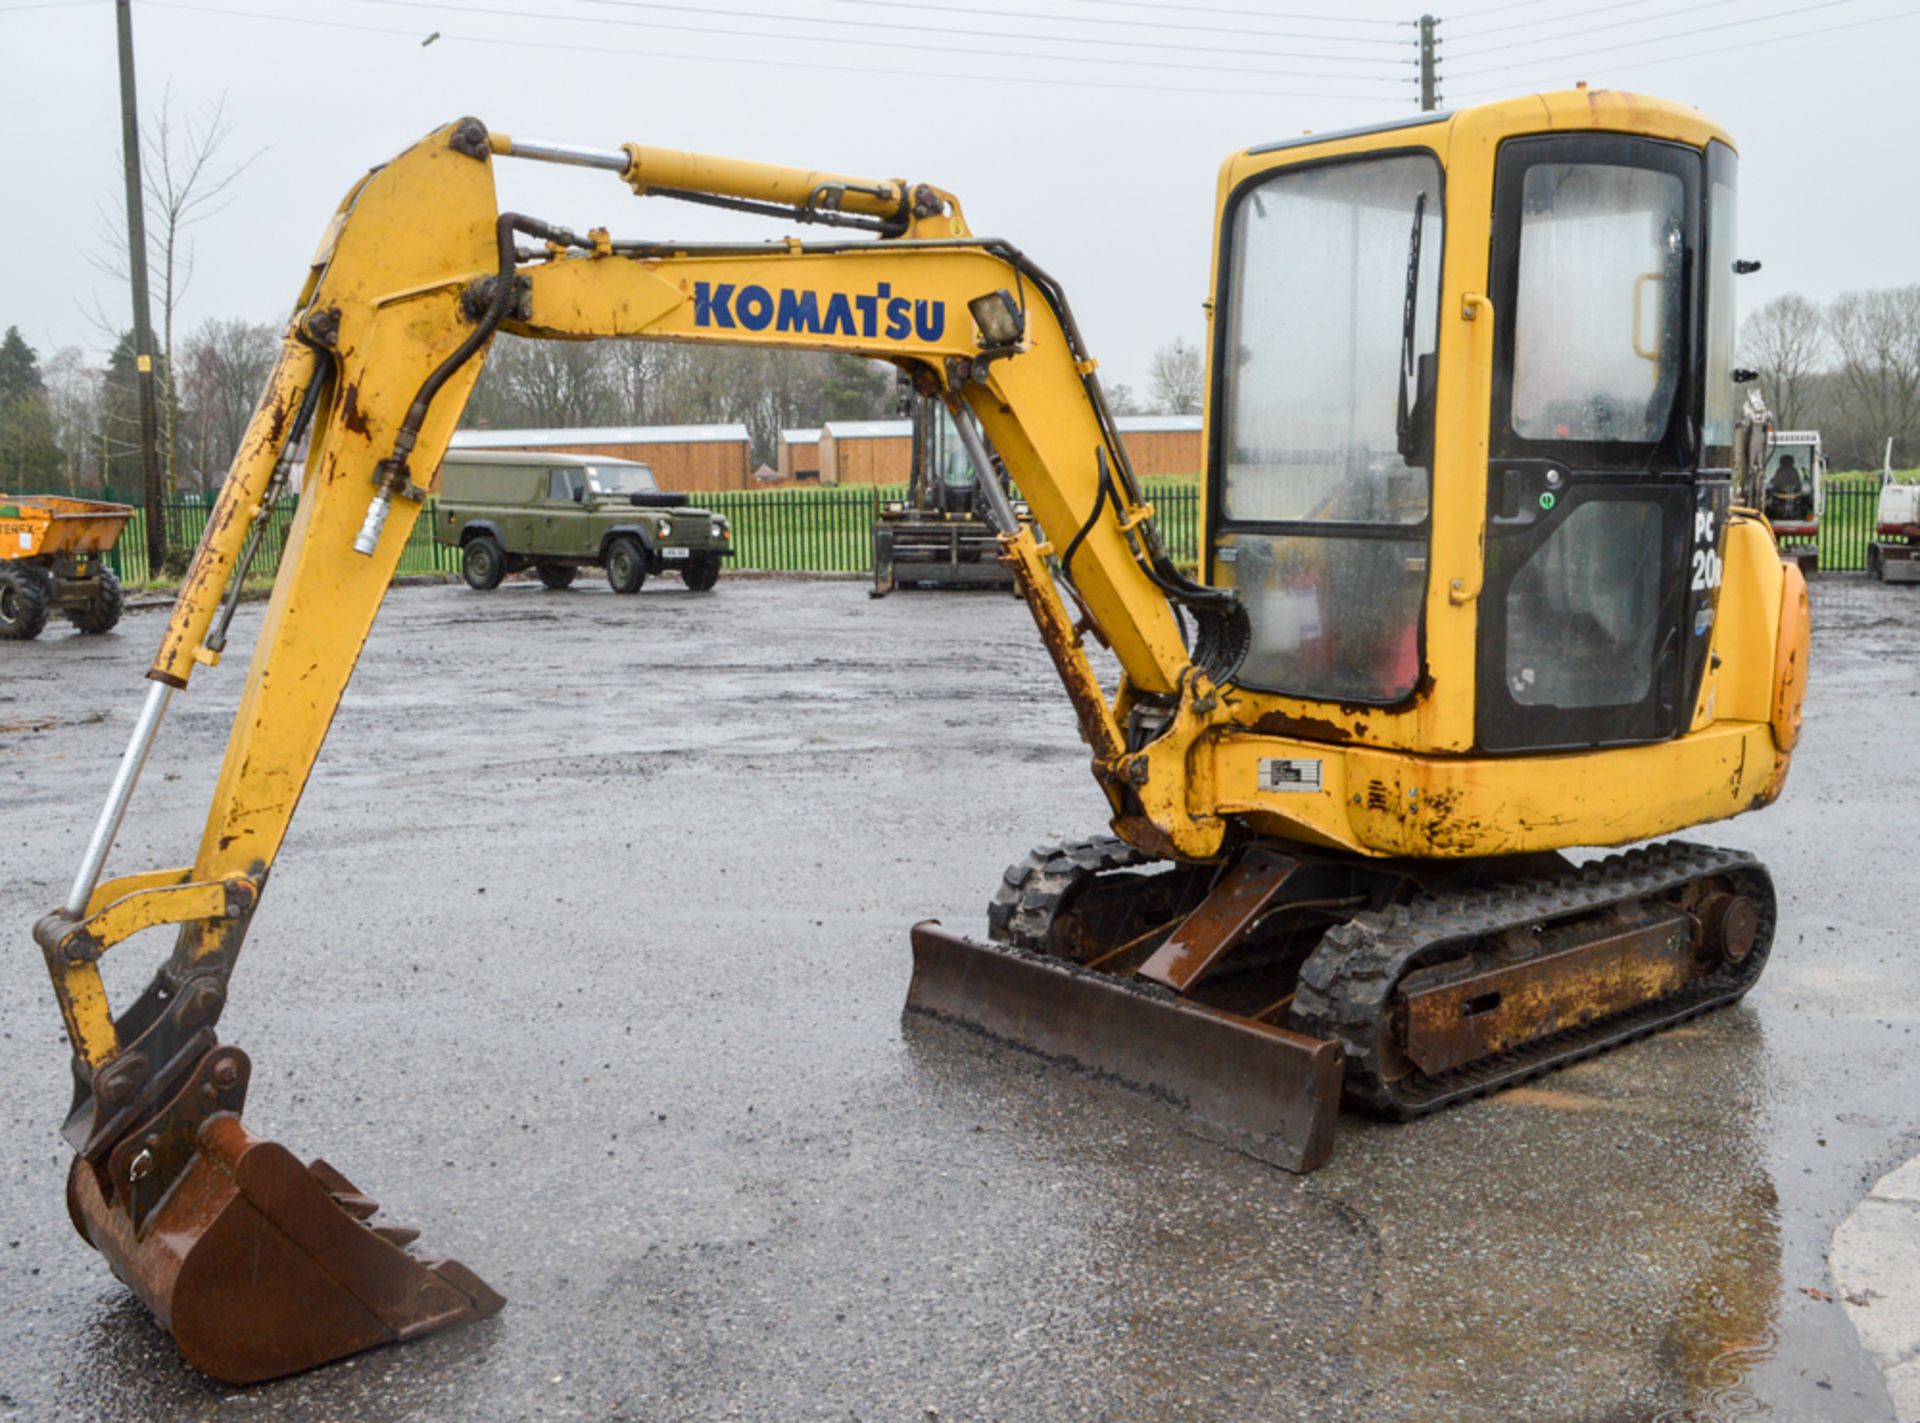 Komatsu PC20R 2.5 tonne rubber tracked mini excavator Year: 2004 S/N: 31719 Recorded Hours: 2941